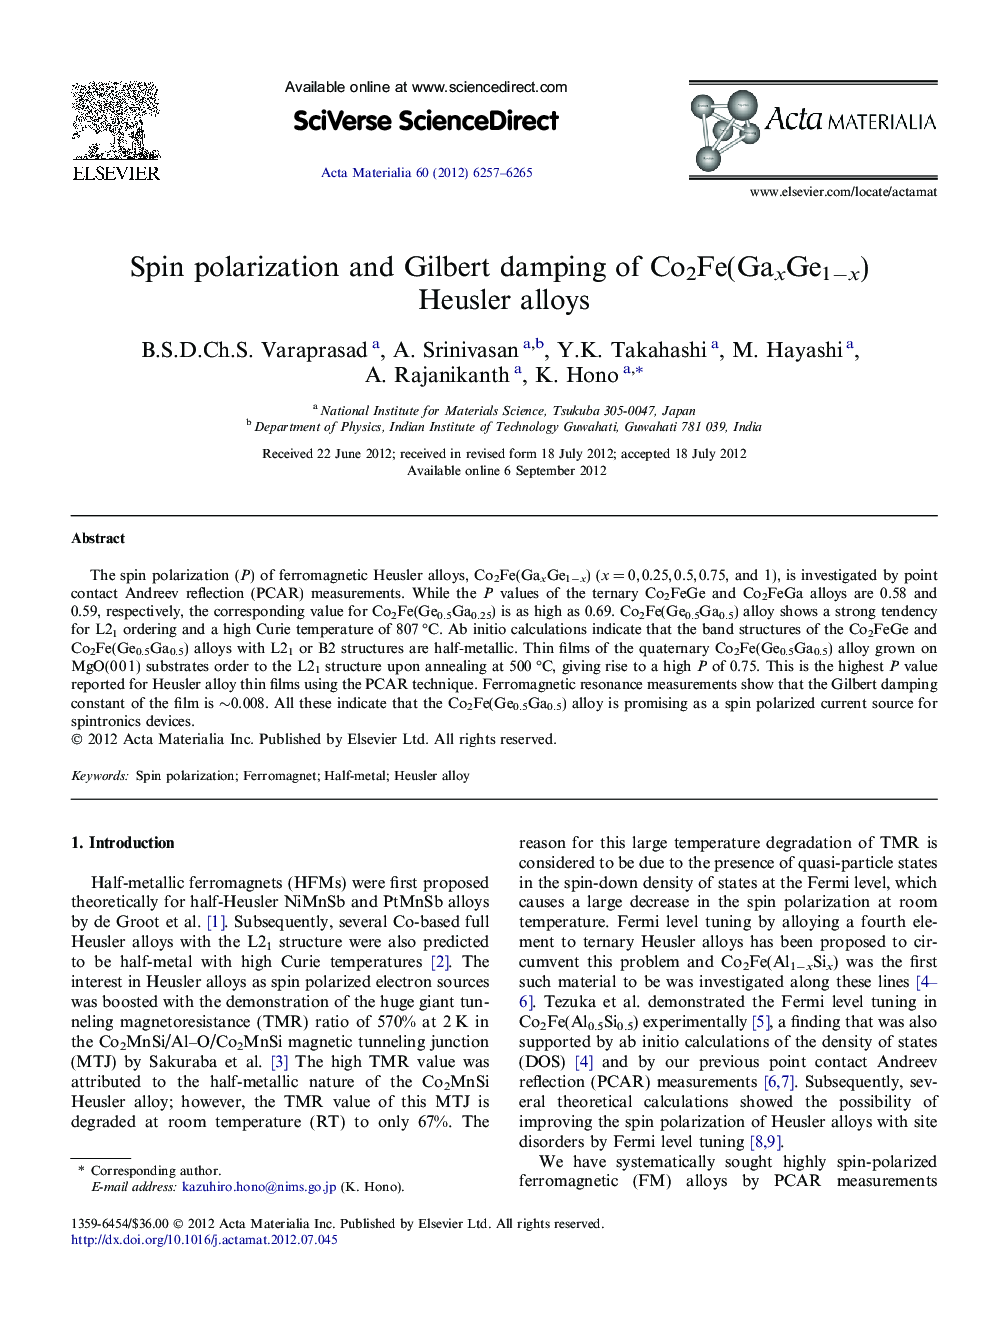 Spin polarization and Gilbert damping of Co2Fe(GaxGe1−x) Heusler alloys